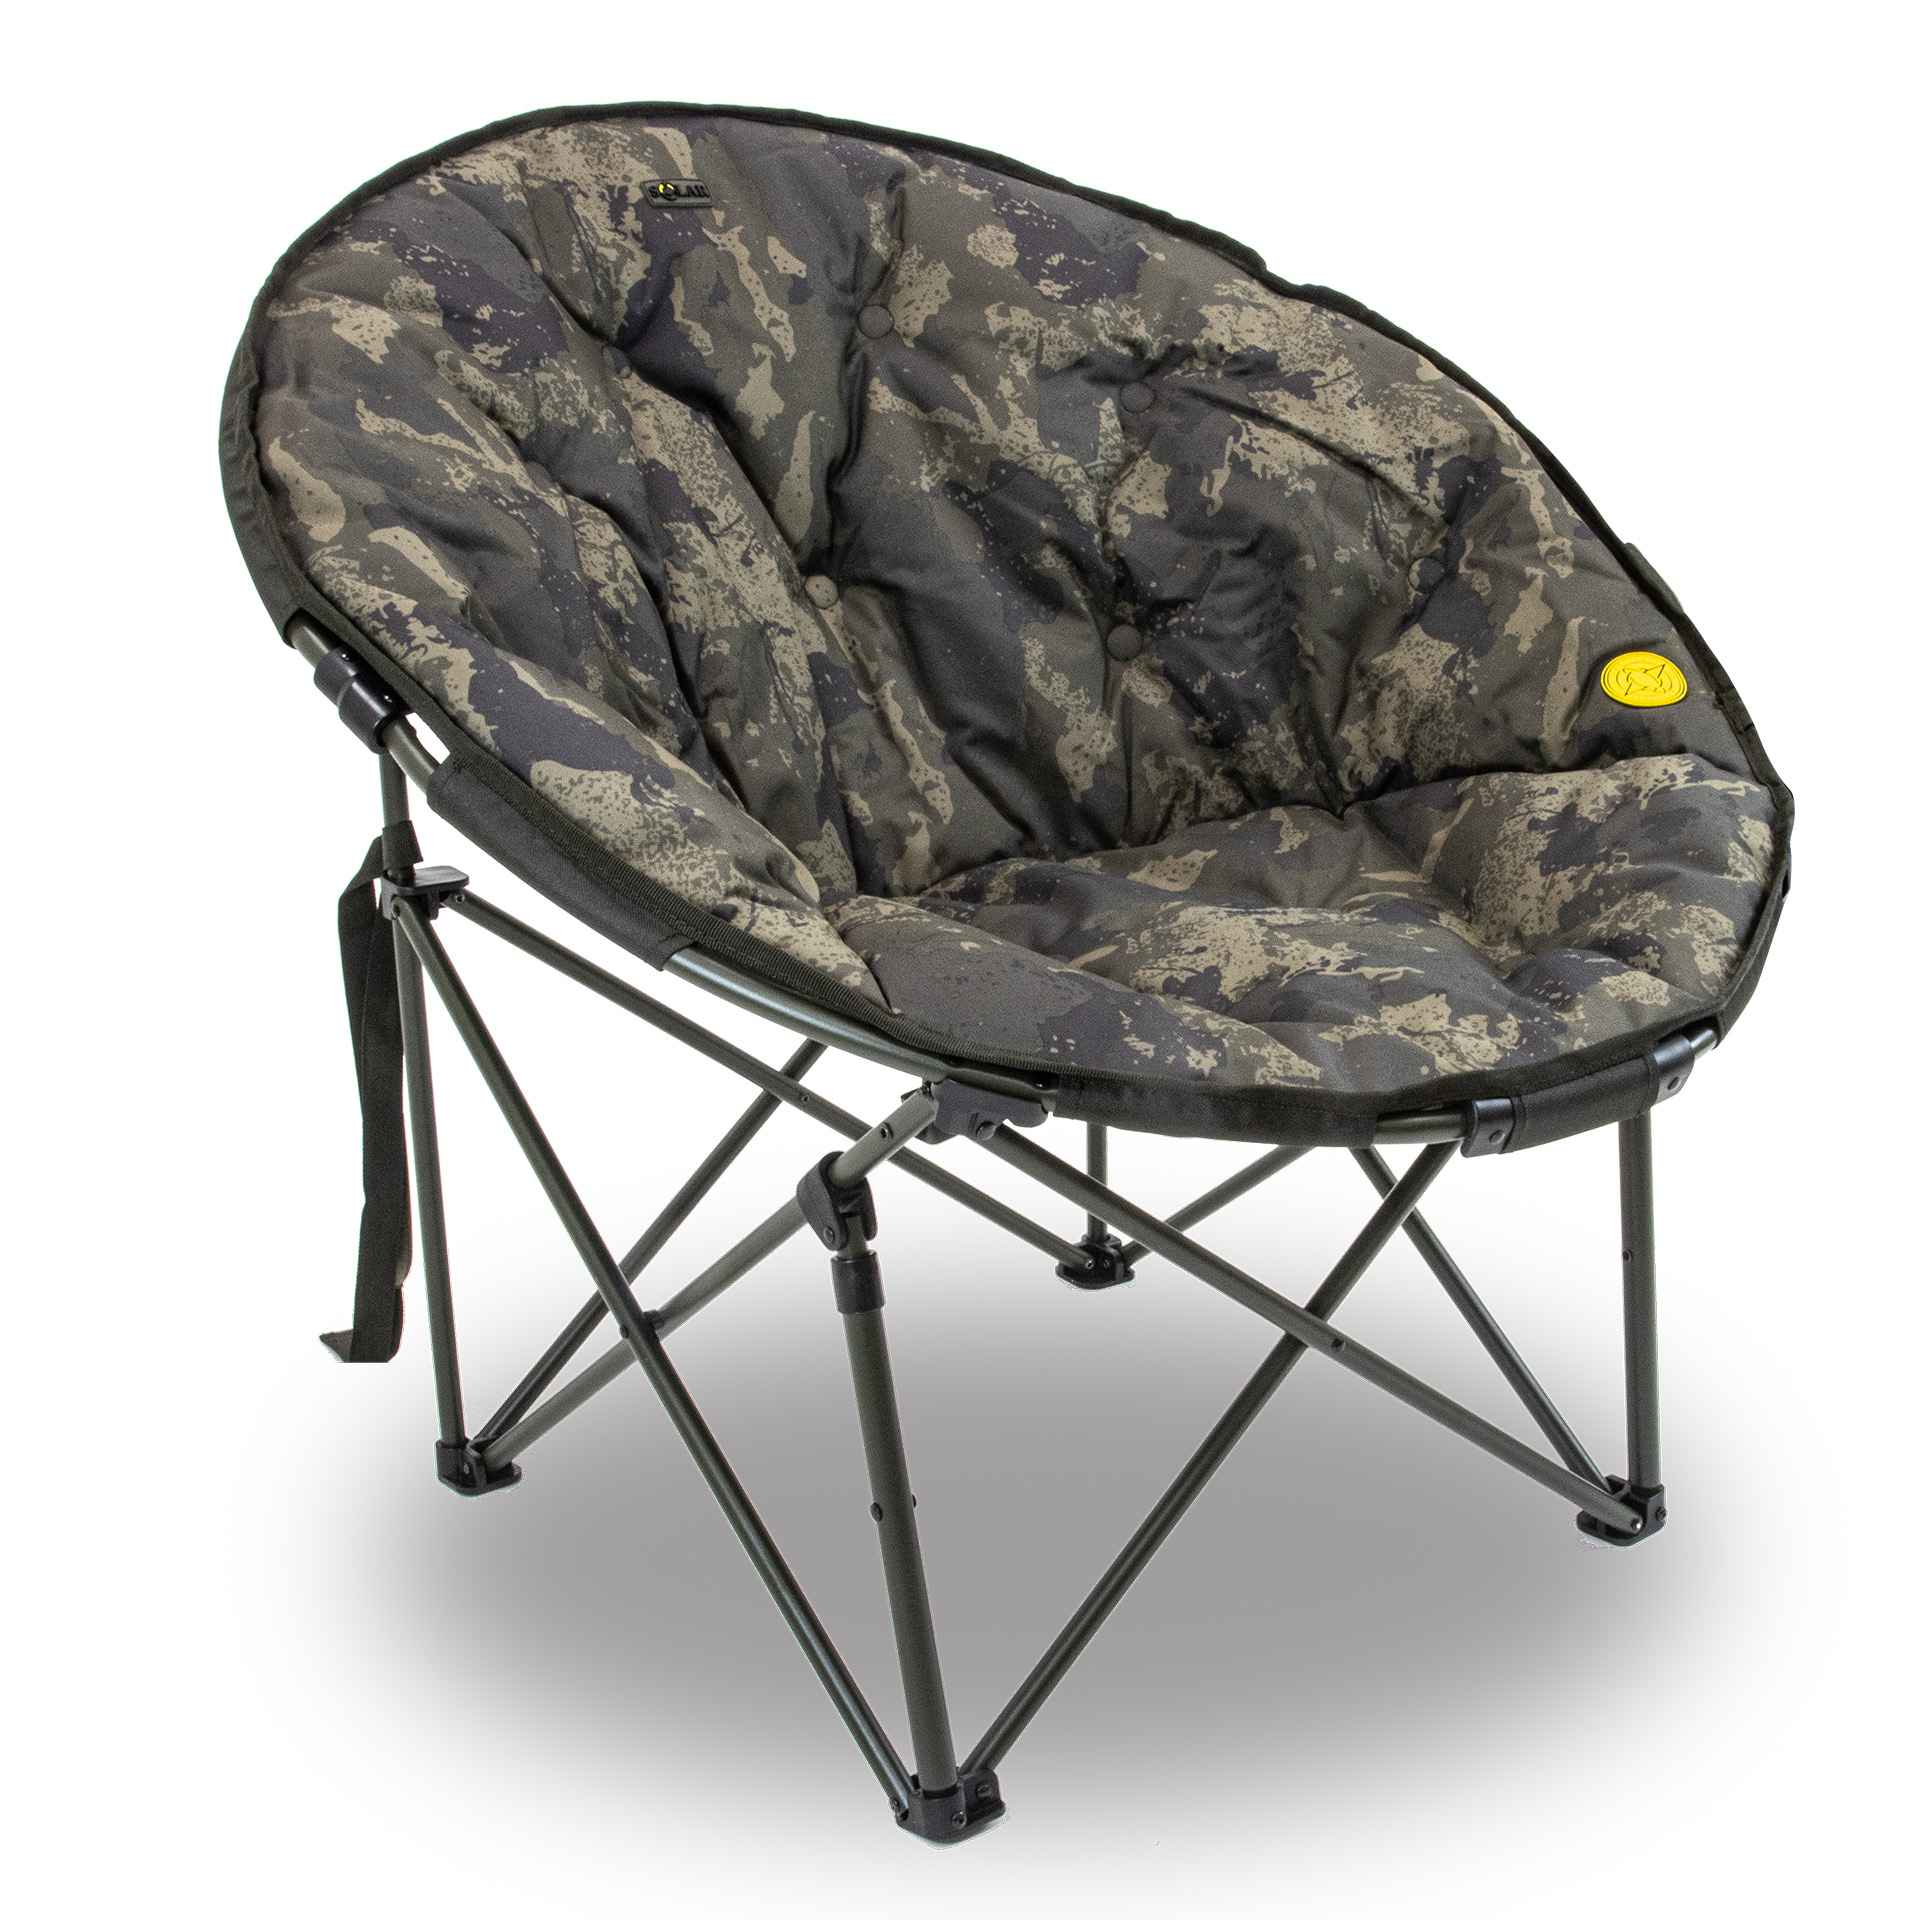 Solar South Westerly Moon Chair Karperstoel